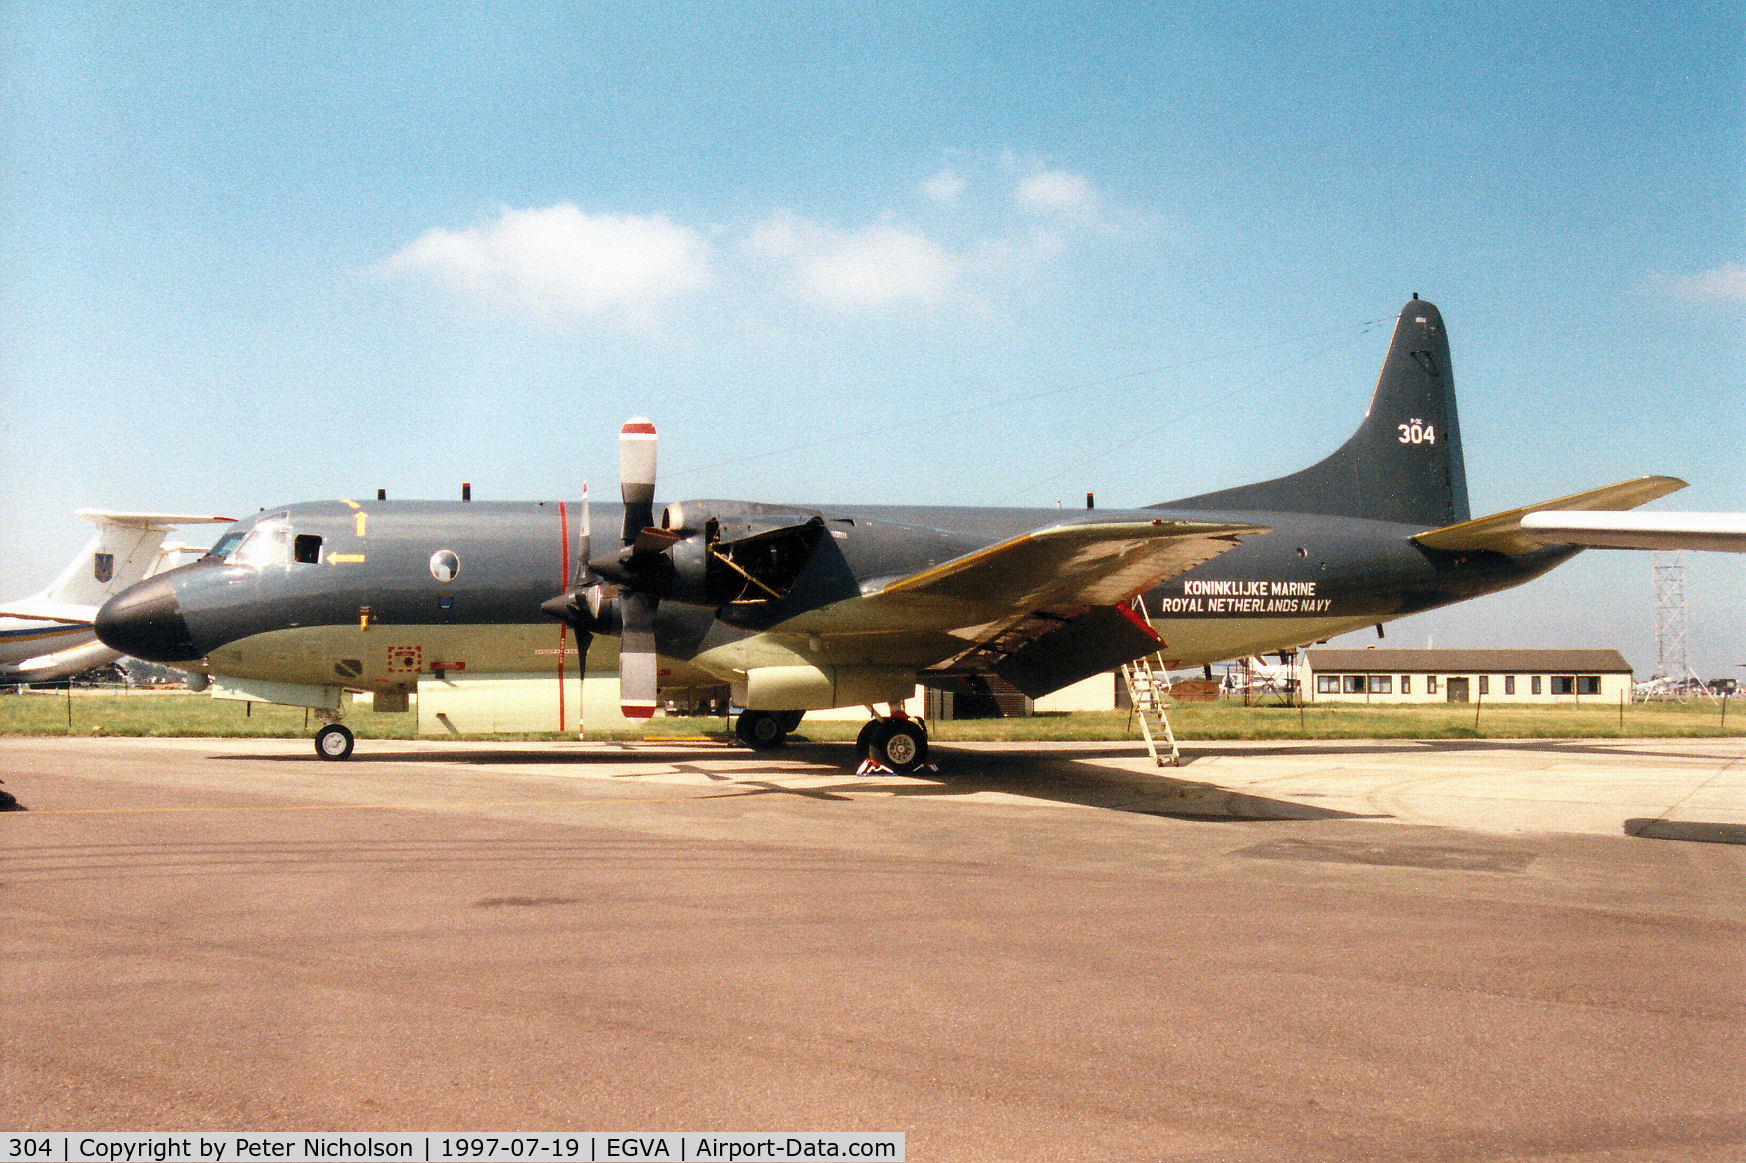 304, Lockheed P-3C Orion C/N 285E-5750, P-3C Orion, callsign Royal Netherlands Navy 368, of 320 Squadron at Valkenberg on display at the 1997 Intnl Air Tattoo at RAF Fairford.